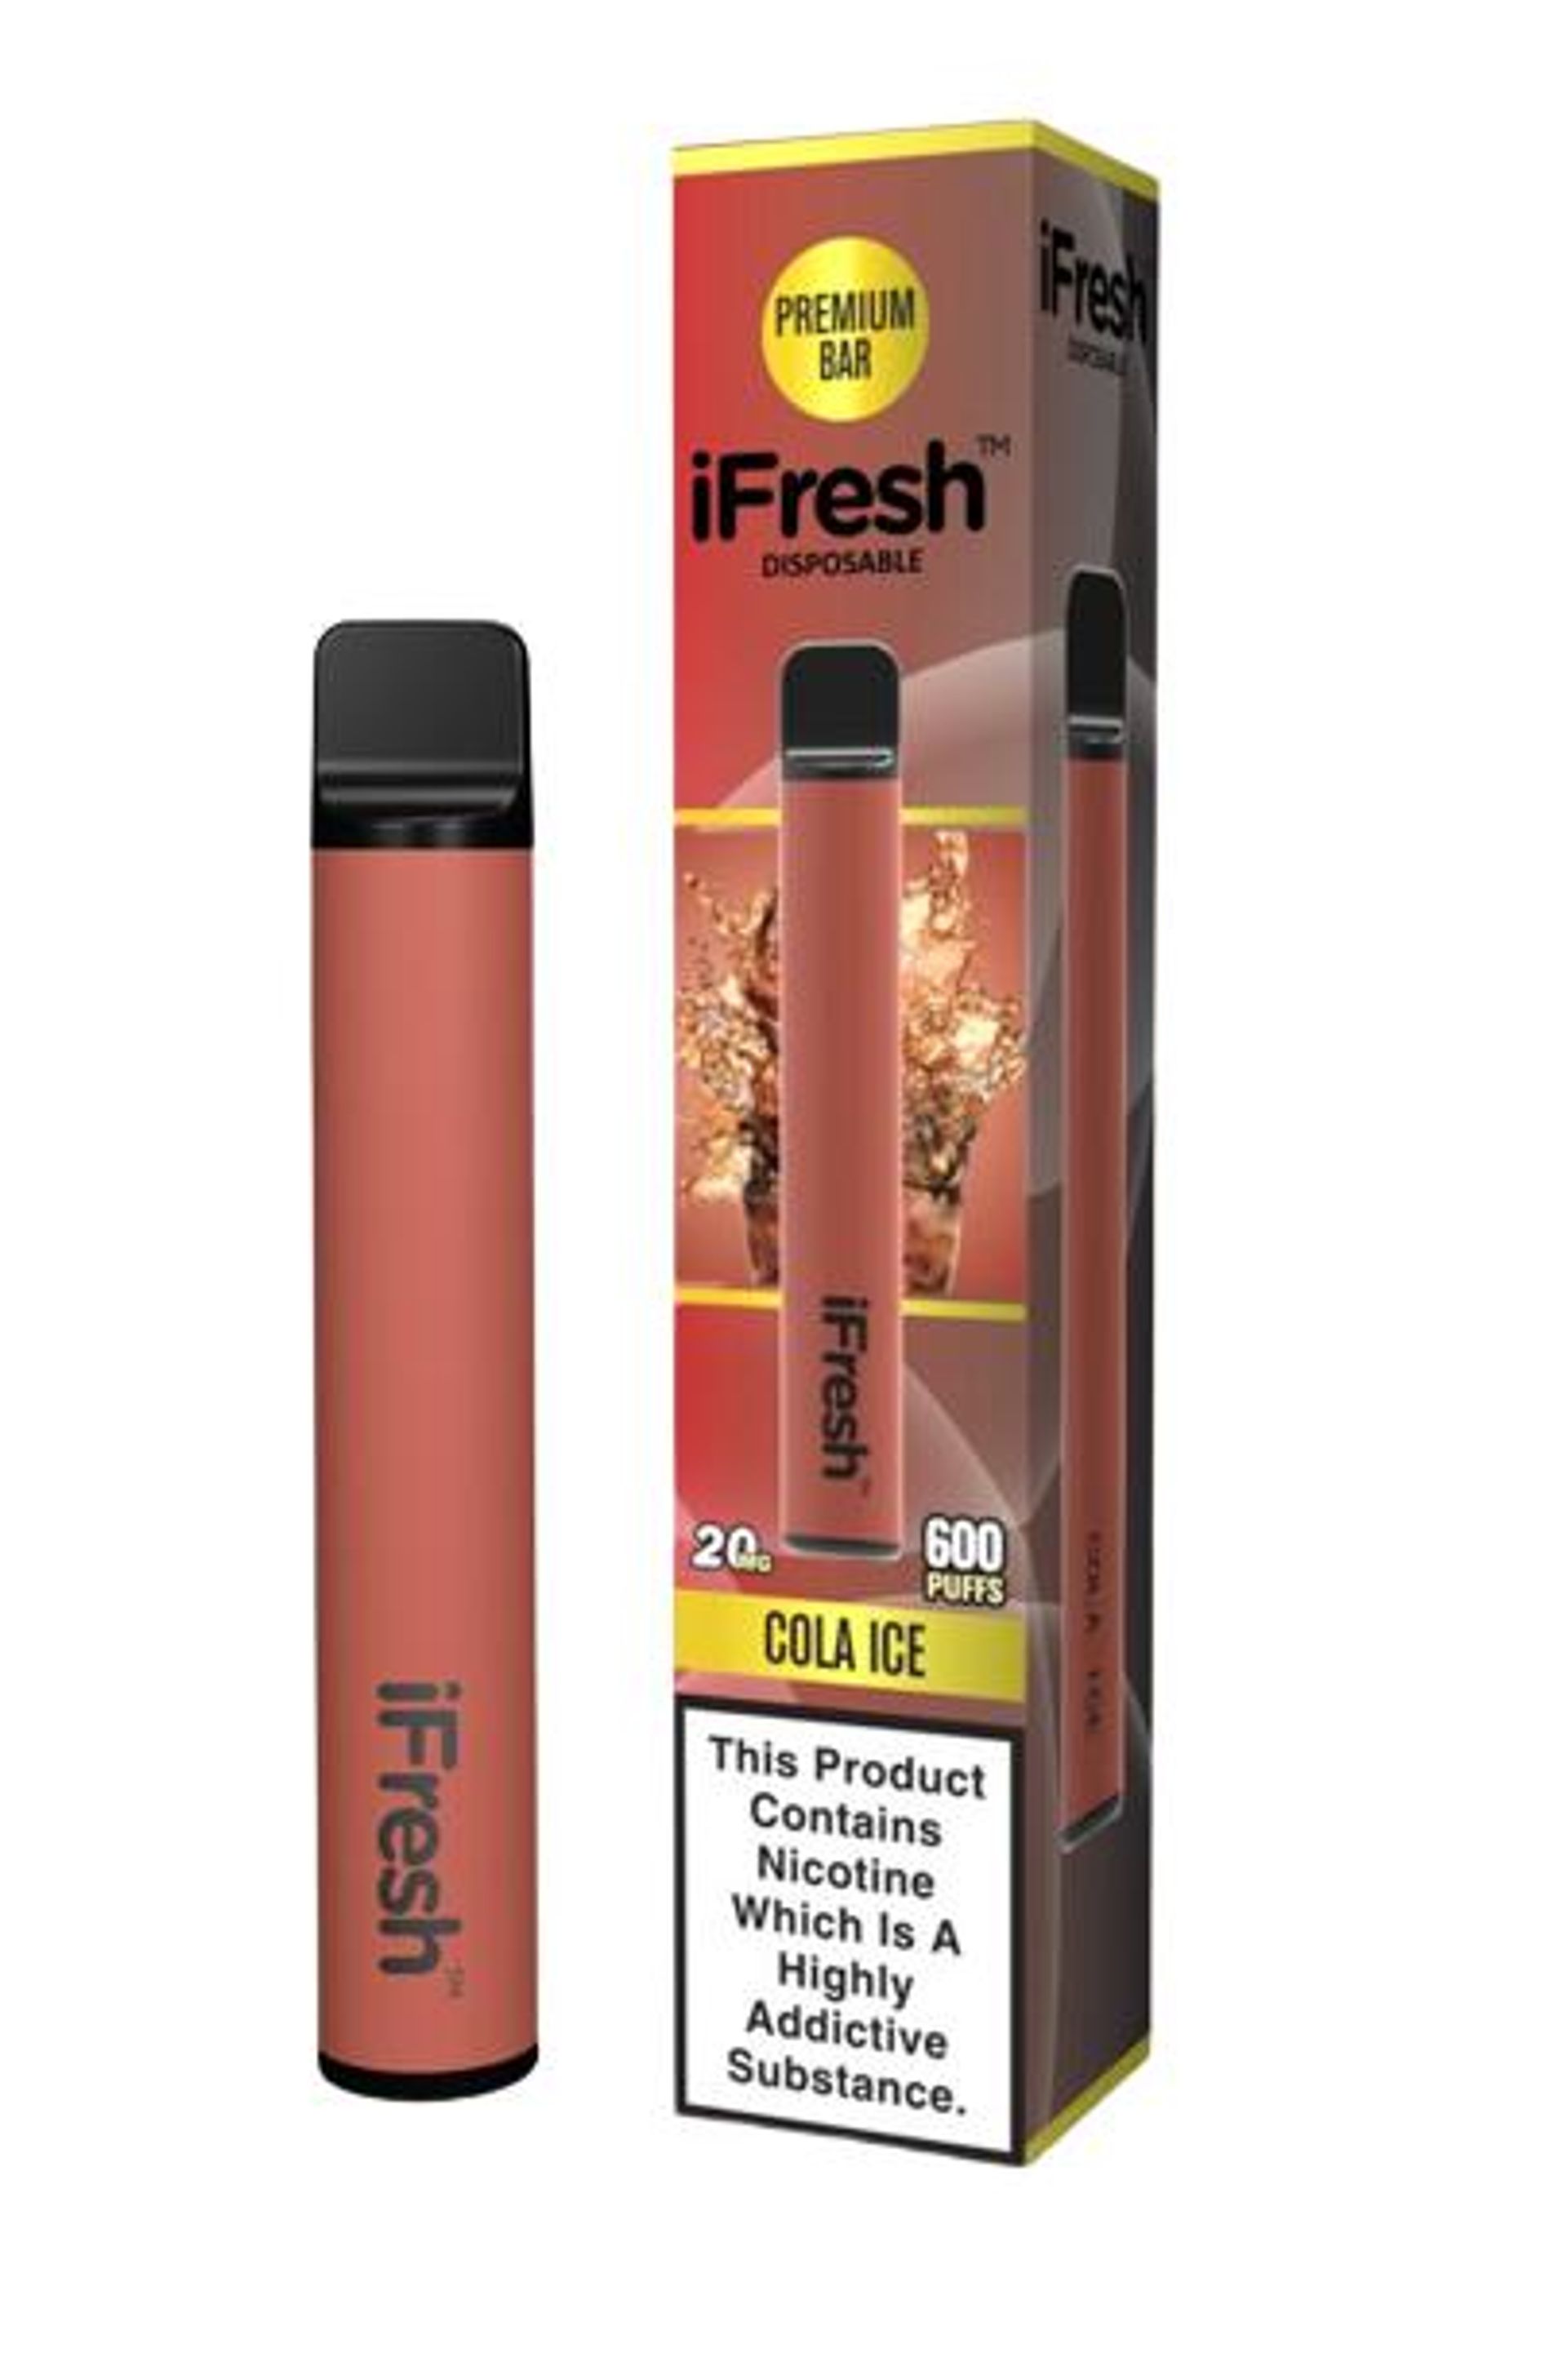 Image of Cola Ice by IFresh